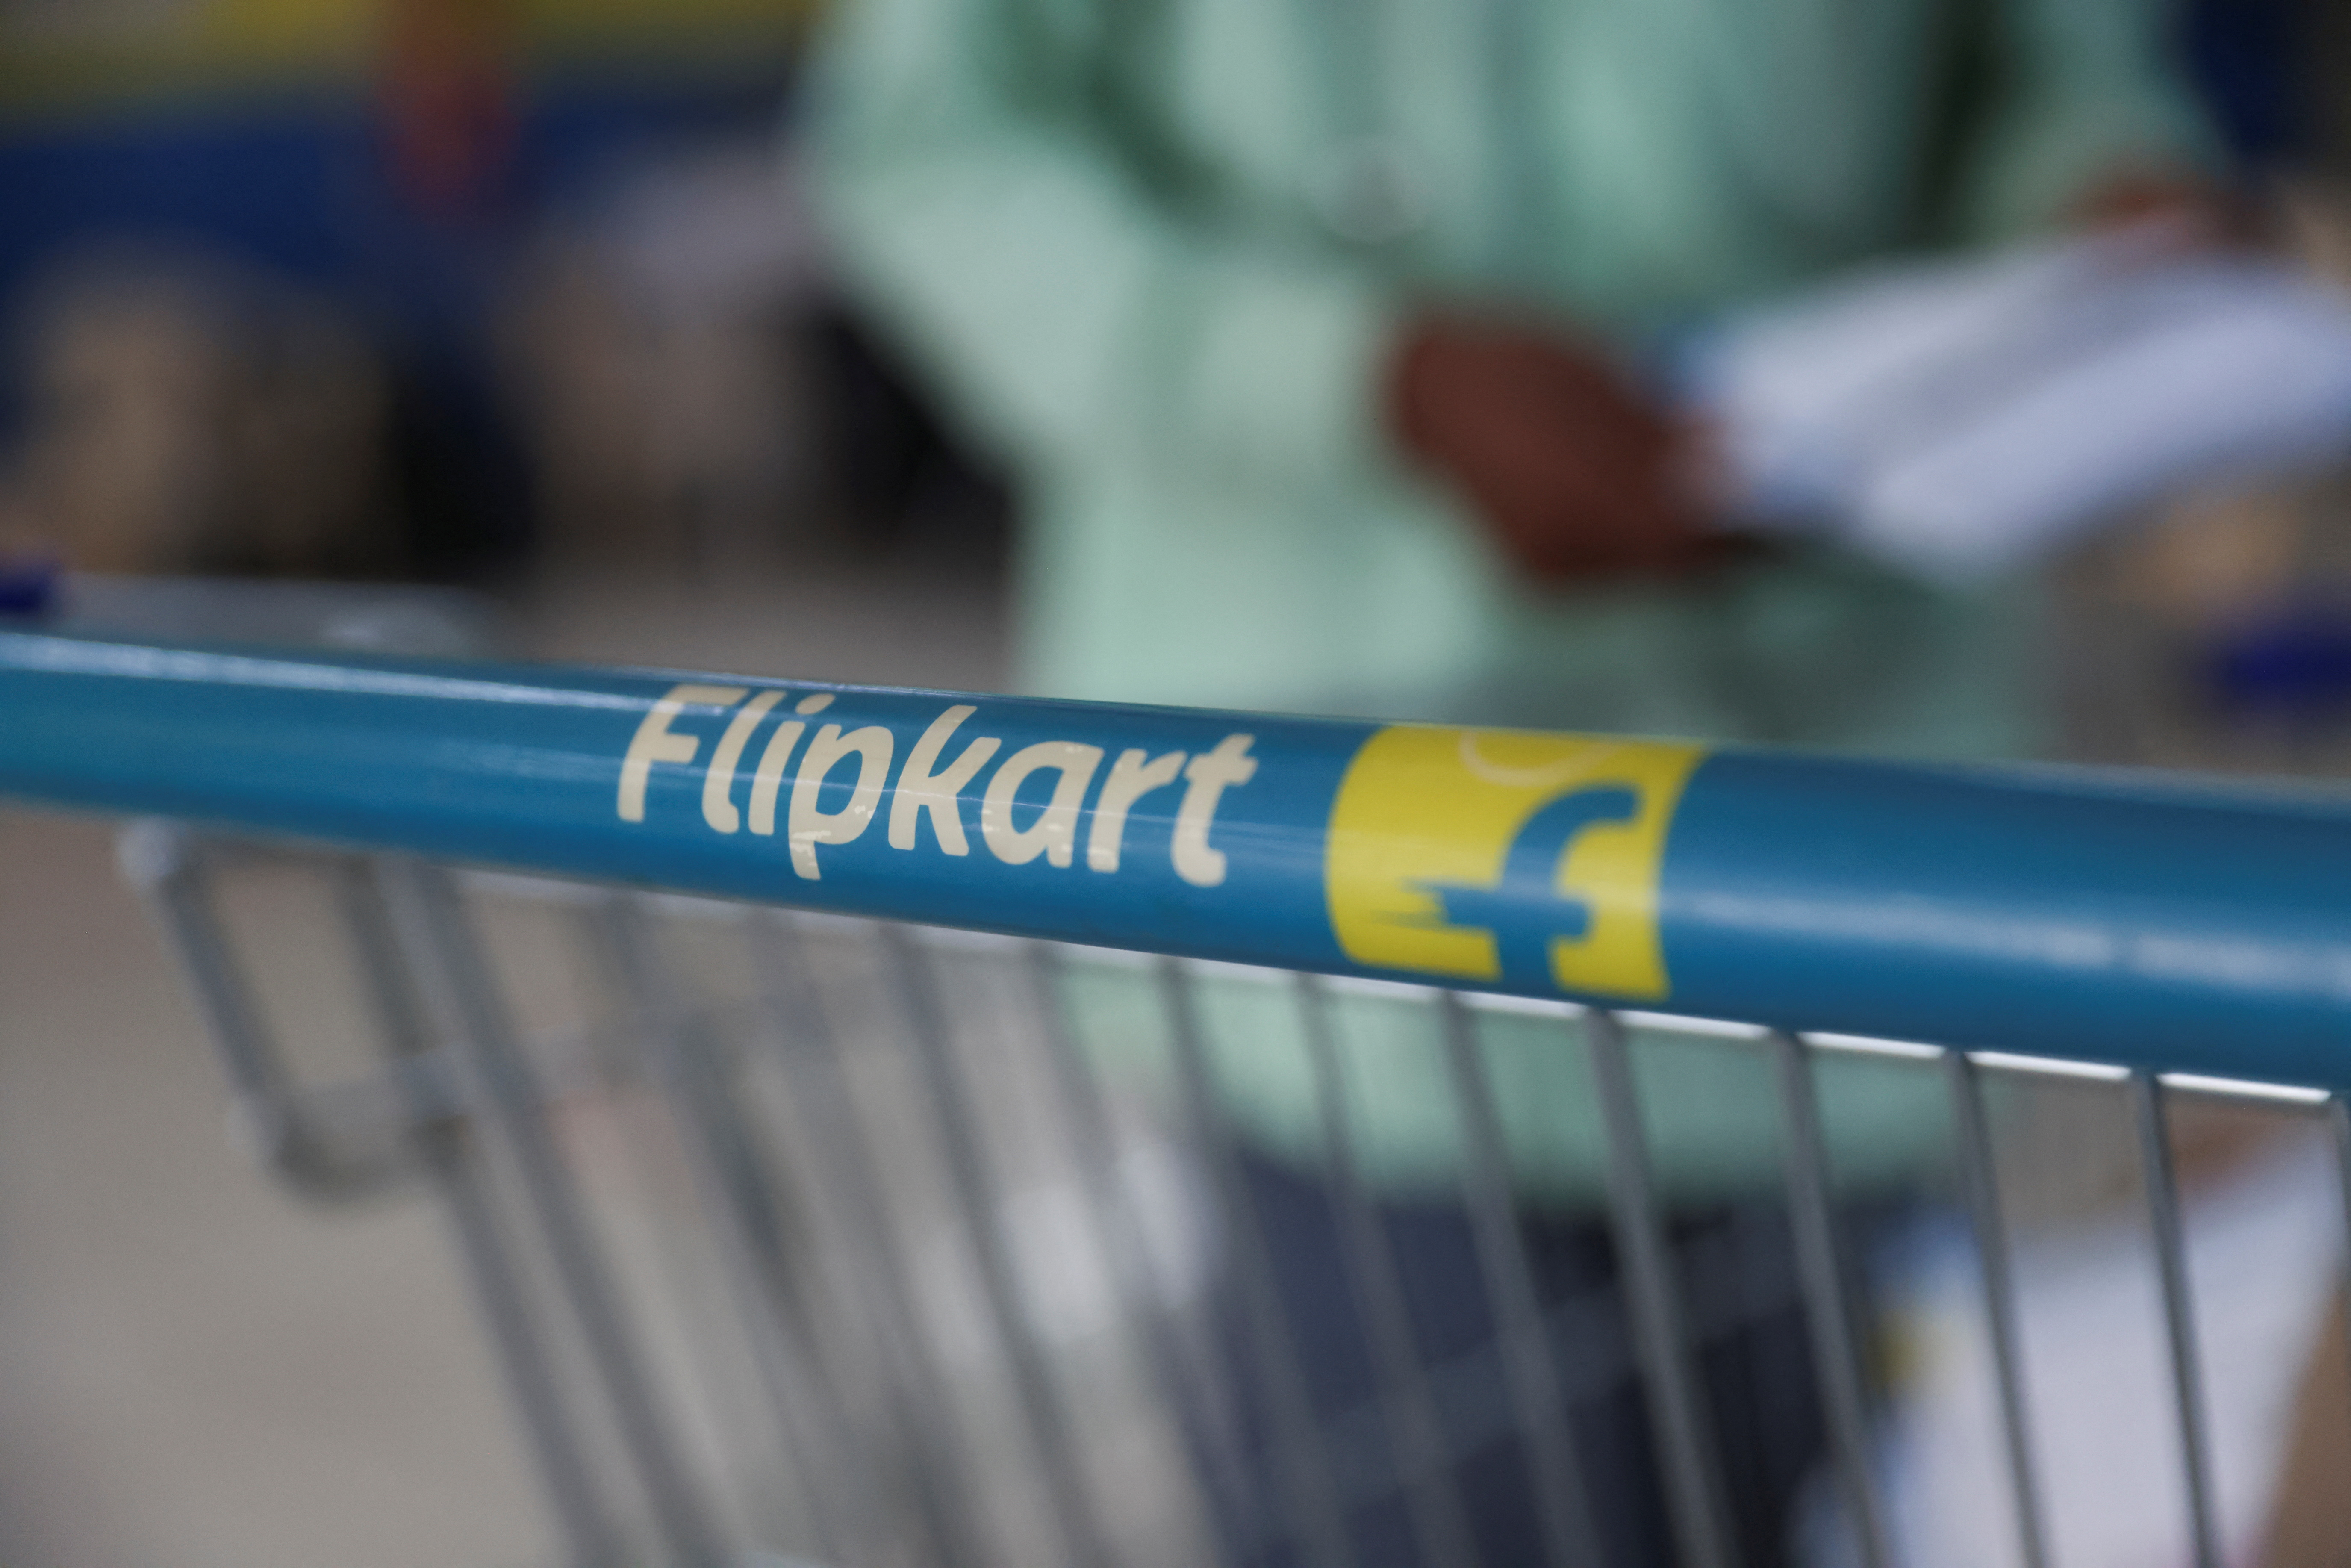 Flipkart's logo is seen on a cart at one of their delivery centres in New Delhi